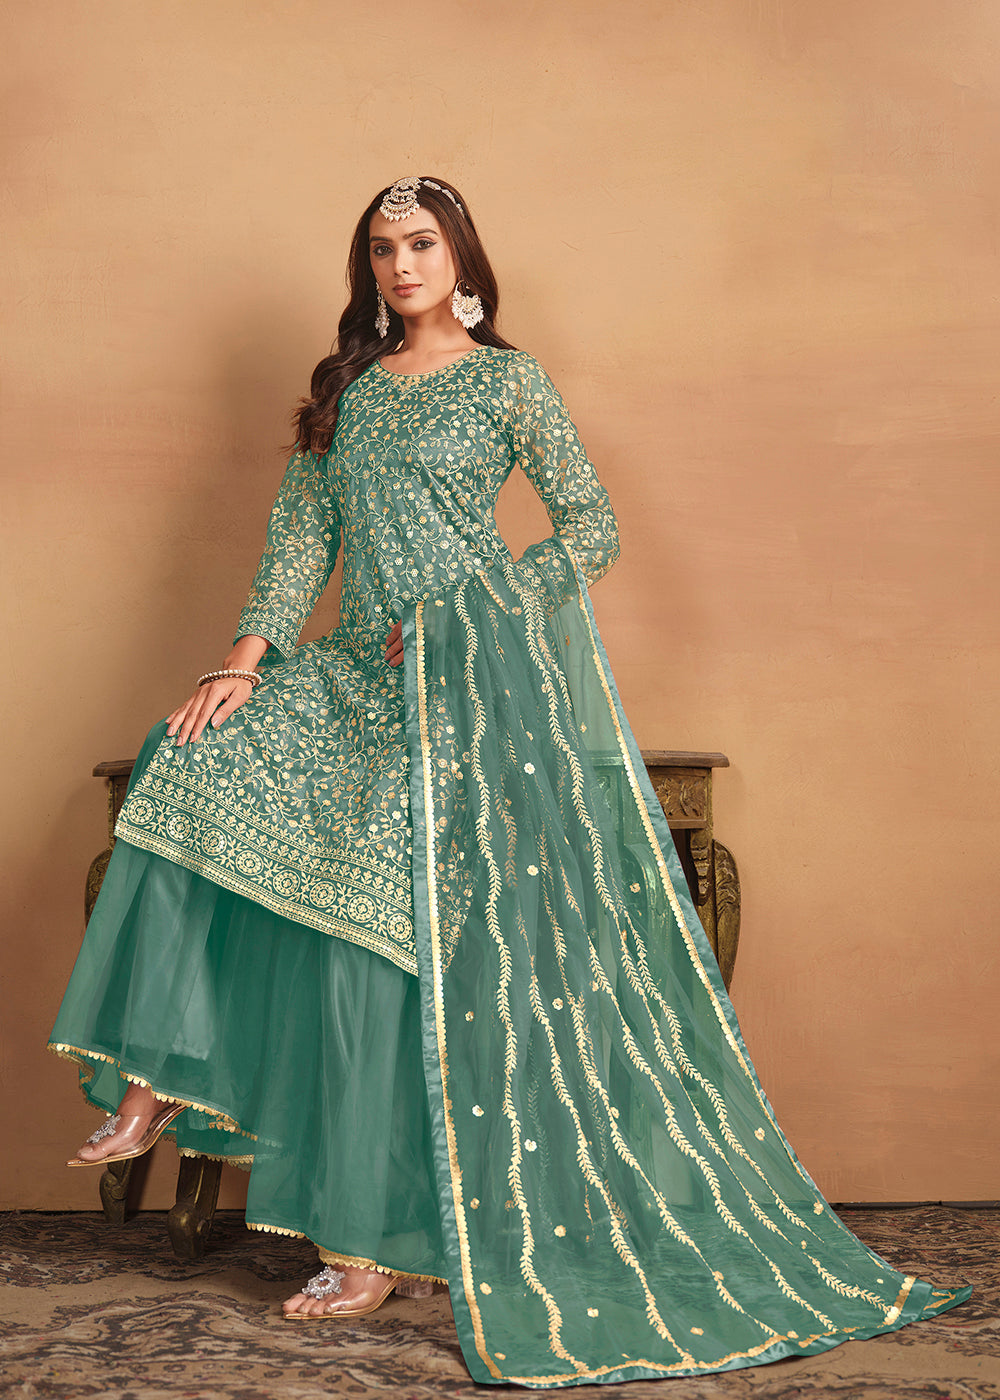 Shop Now Net Mint Green Embroidered Gharara Style Suit Online at Empress Clothing in USA, UK, Canada, Italy & Worldwide. 